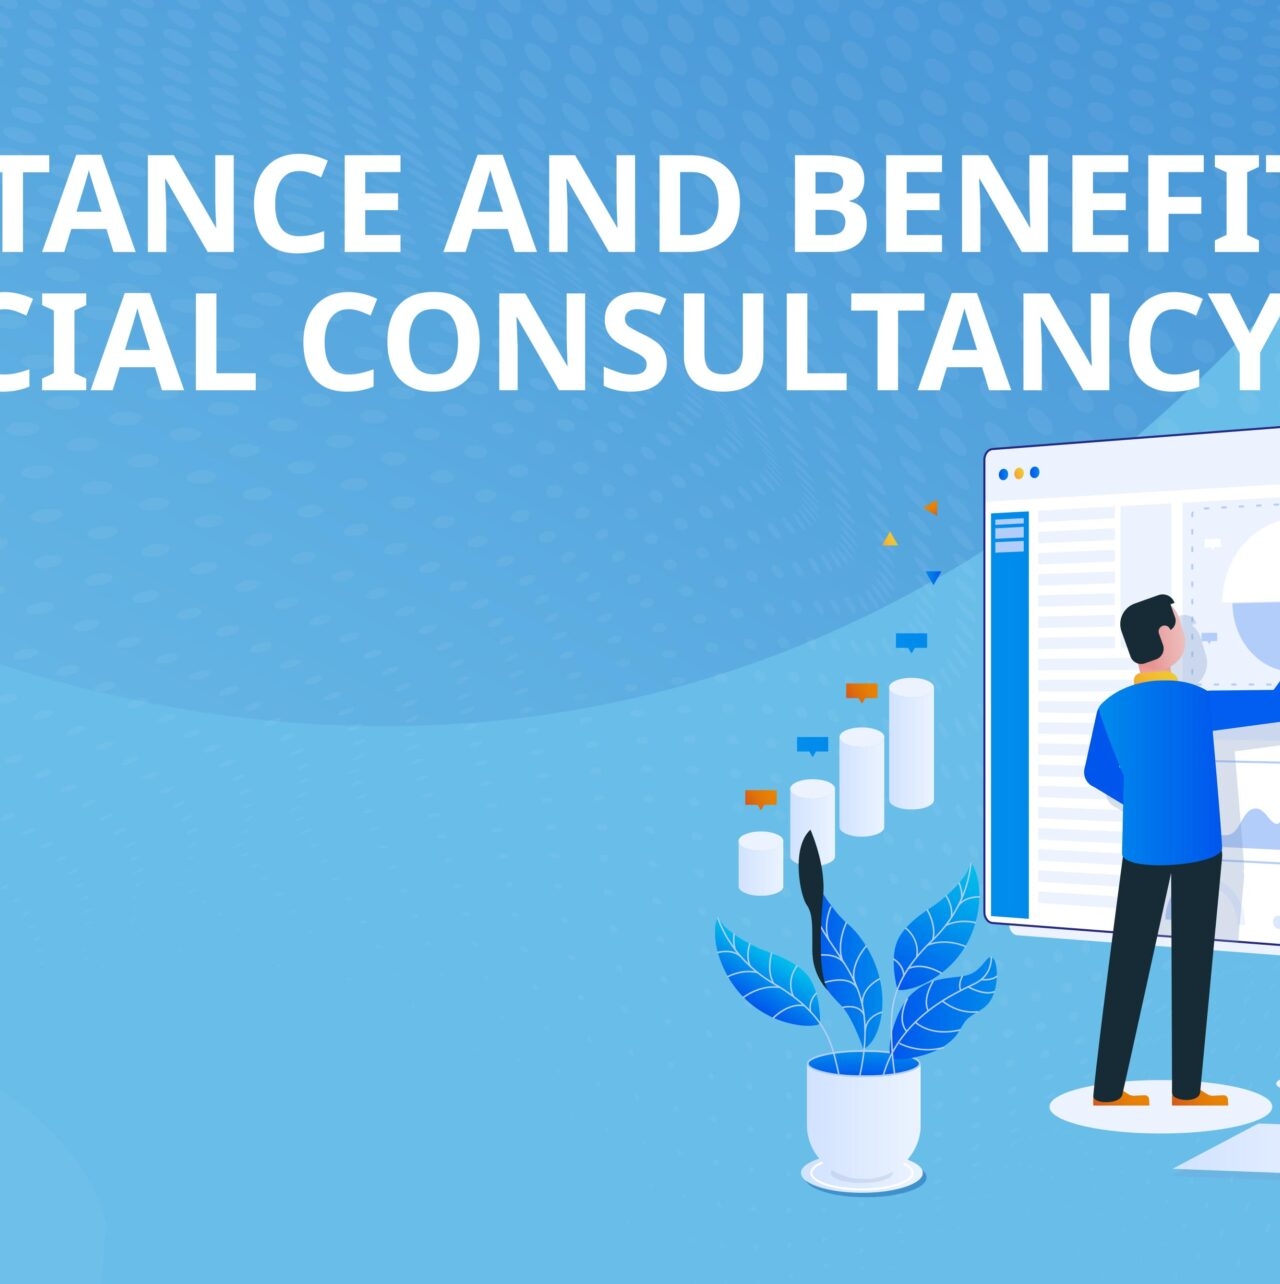 Importance and benefits of financial consultancy